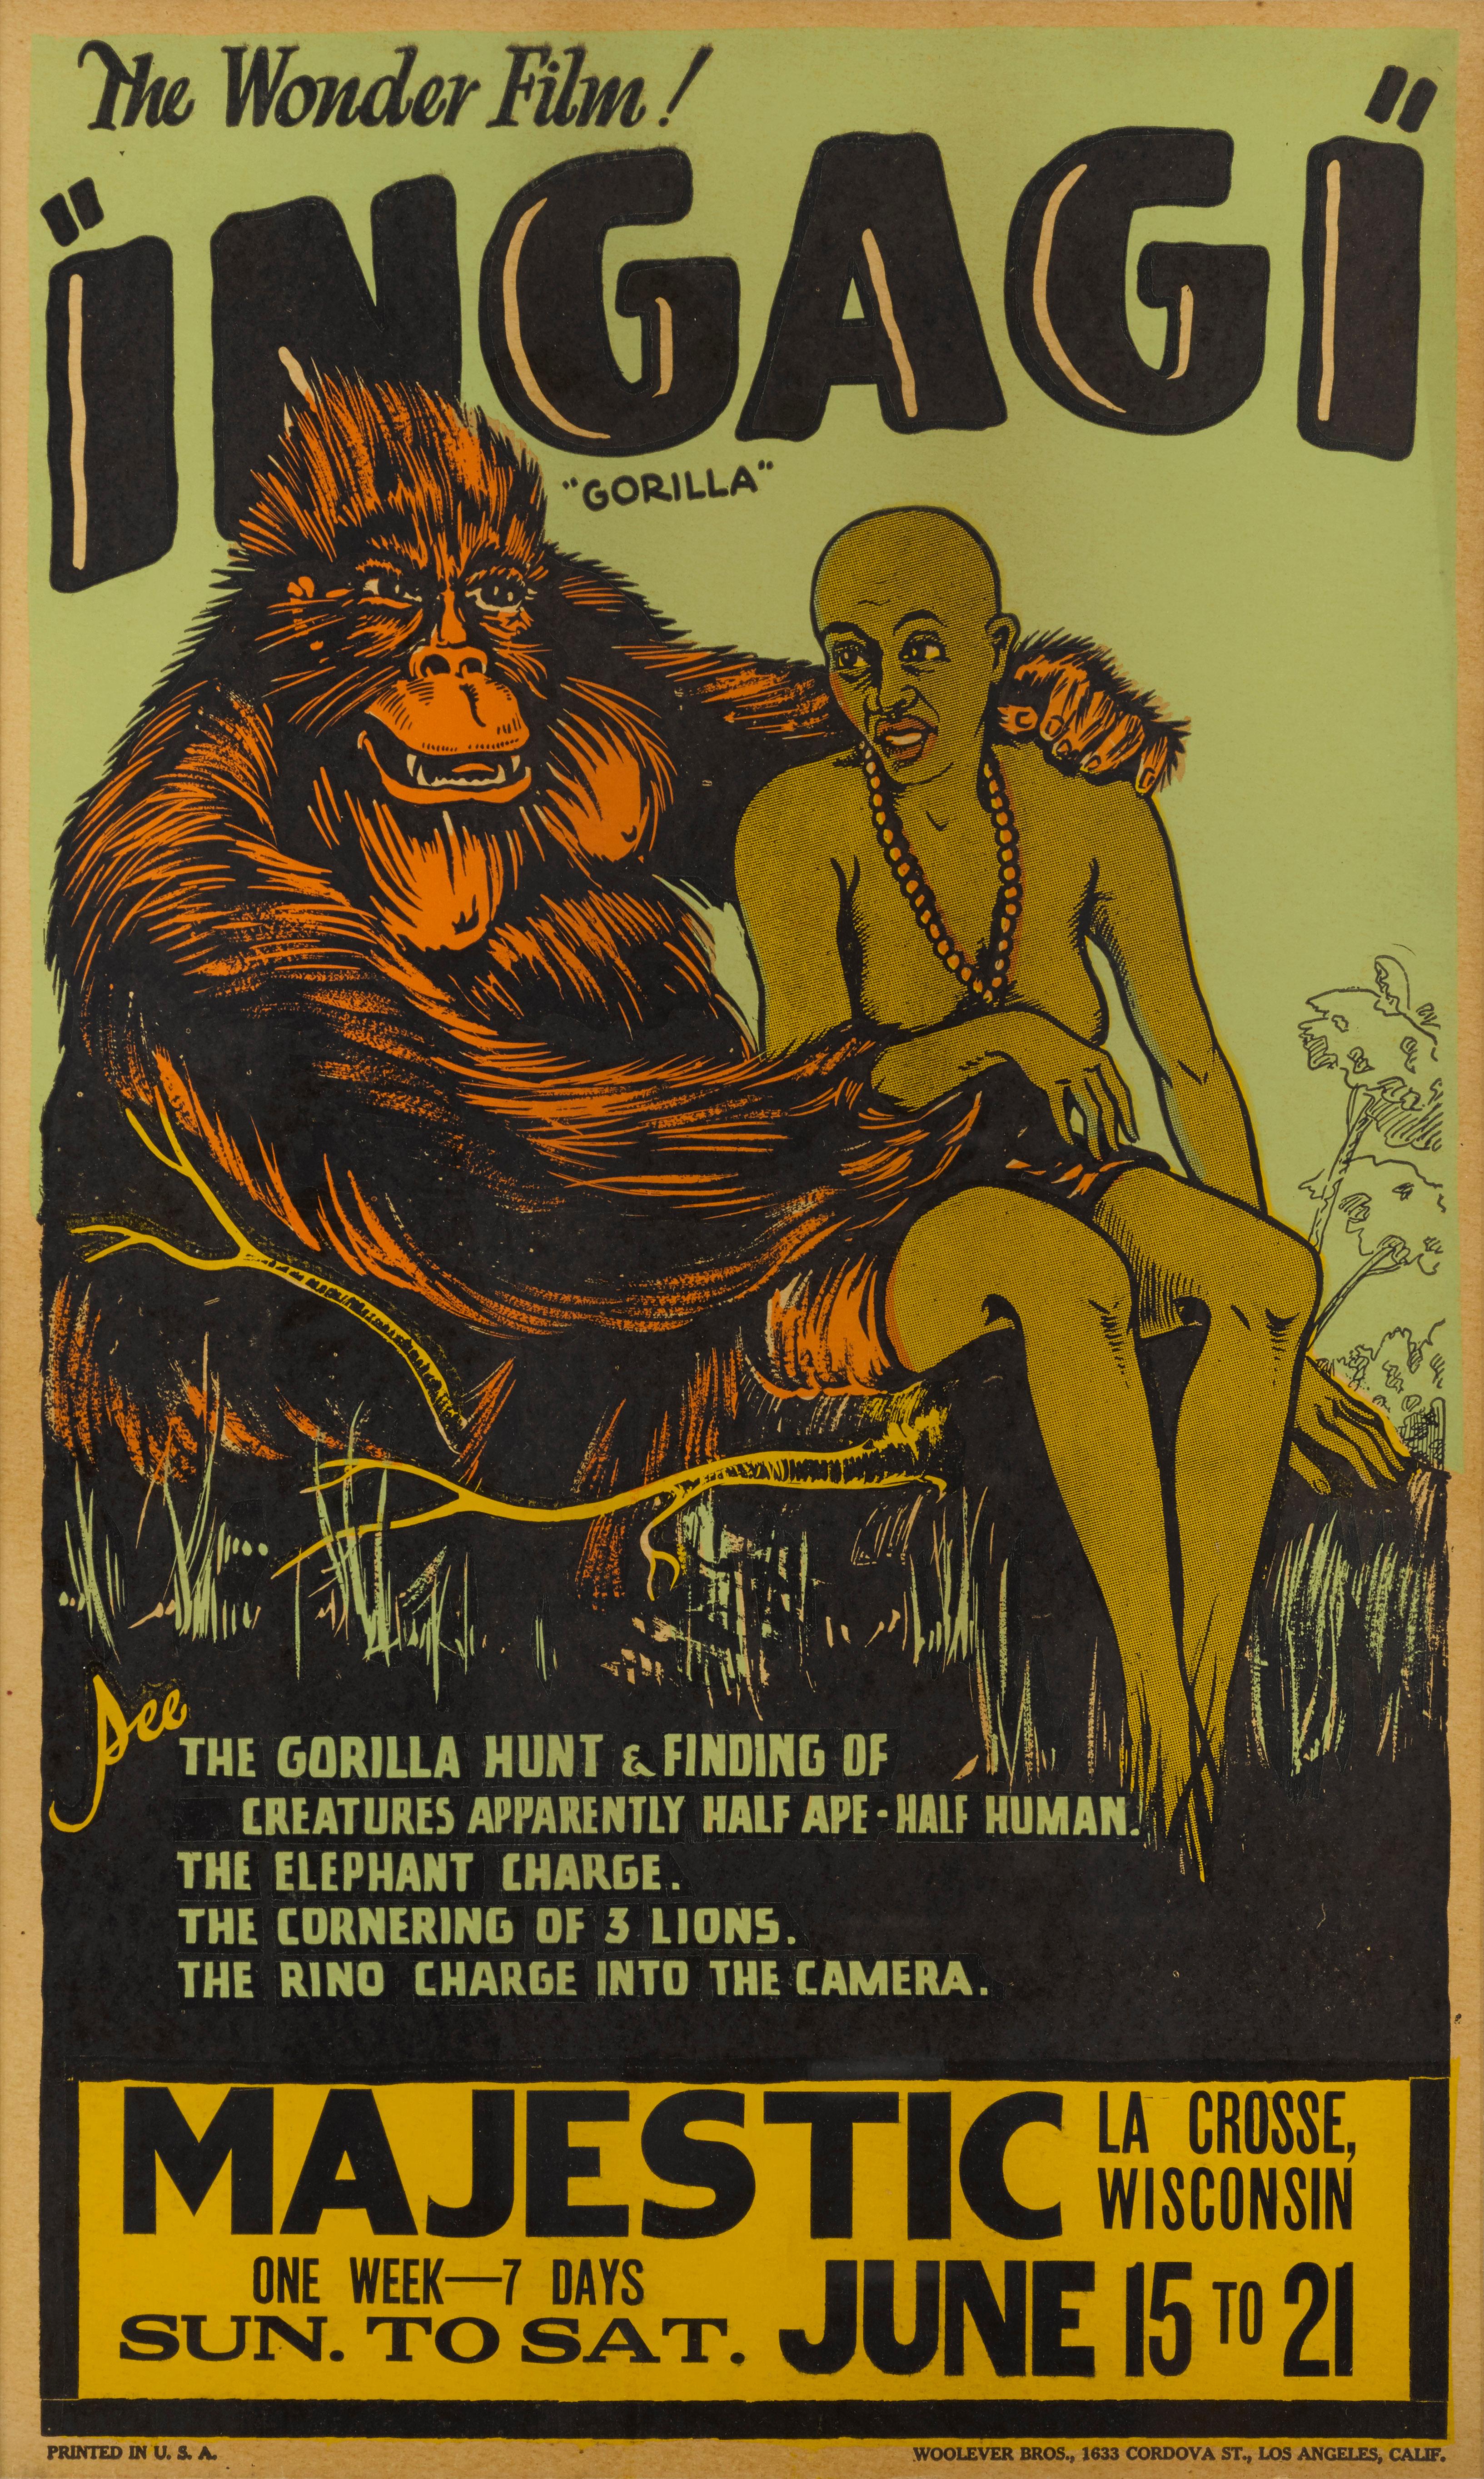 Original US film poster for the 1930 Exploitation film.
Very few posters exist on this film from 1930.
Ingagi is an exploitation film, although when released, it claimed to be a documentary about Sir Hubert Winstead's expedition to the Belgian